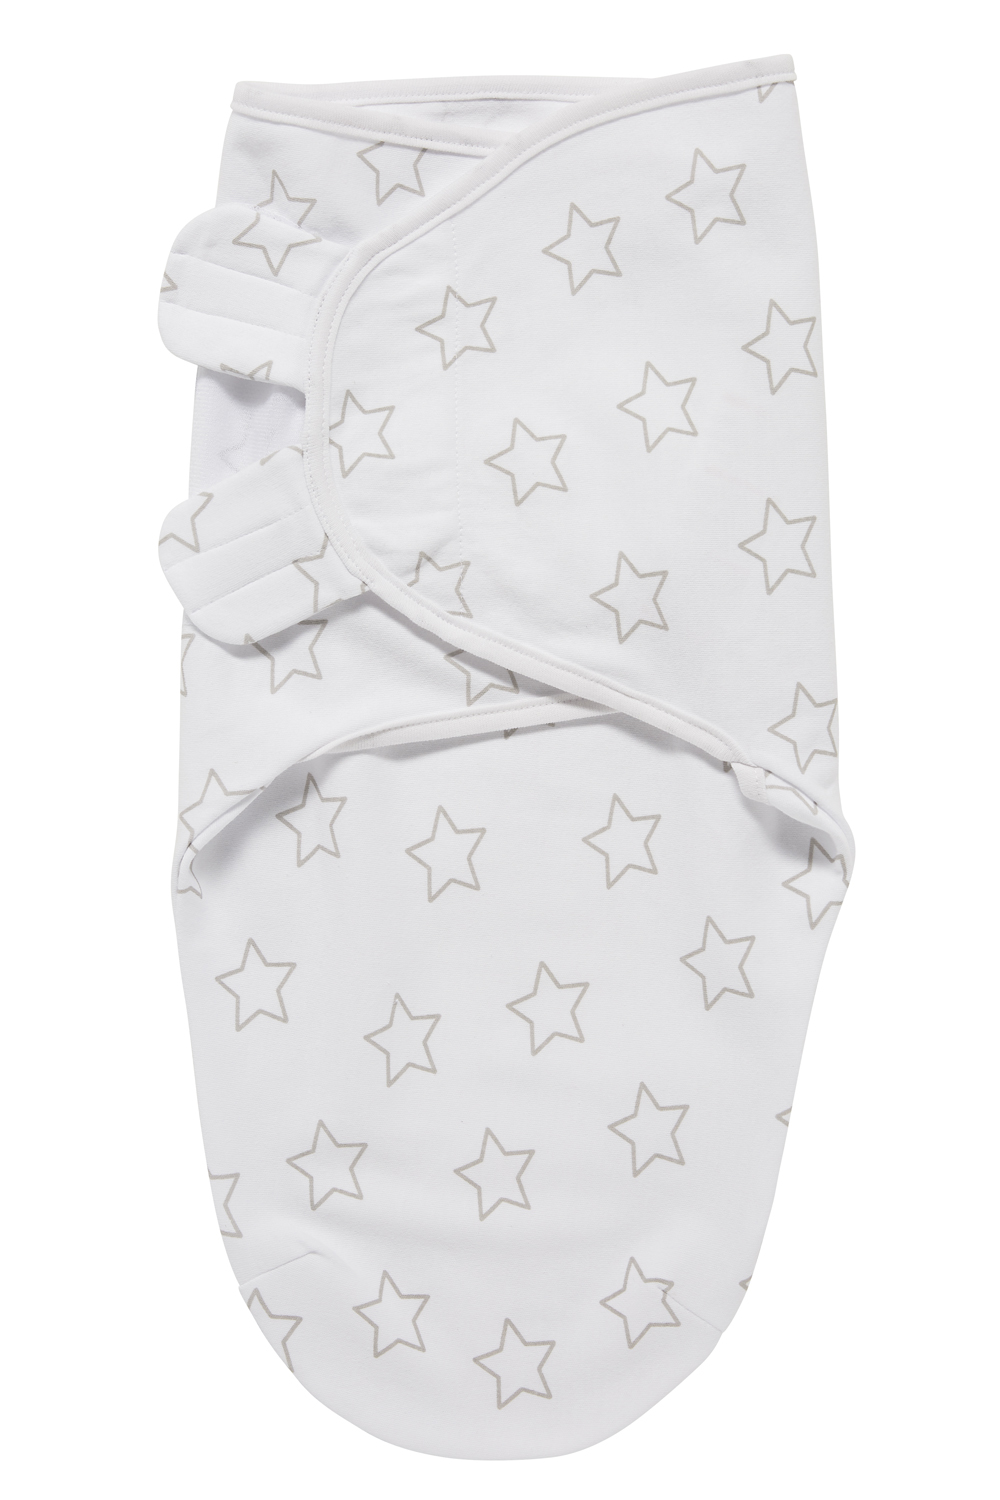 Swaddle Stars - grey - 4-6 Months